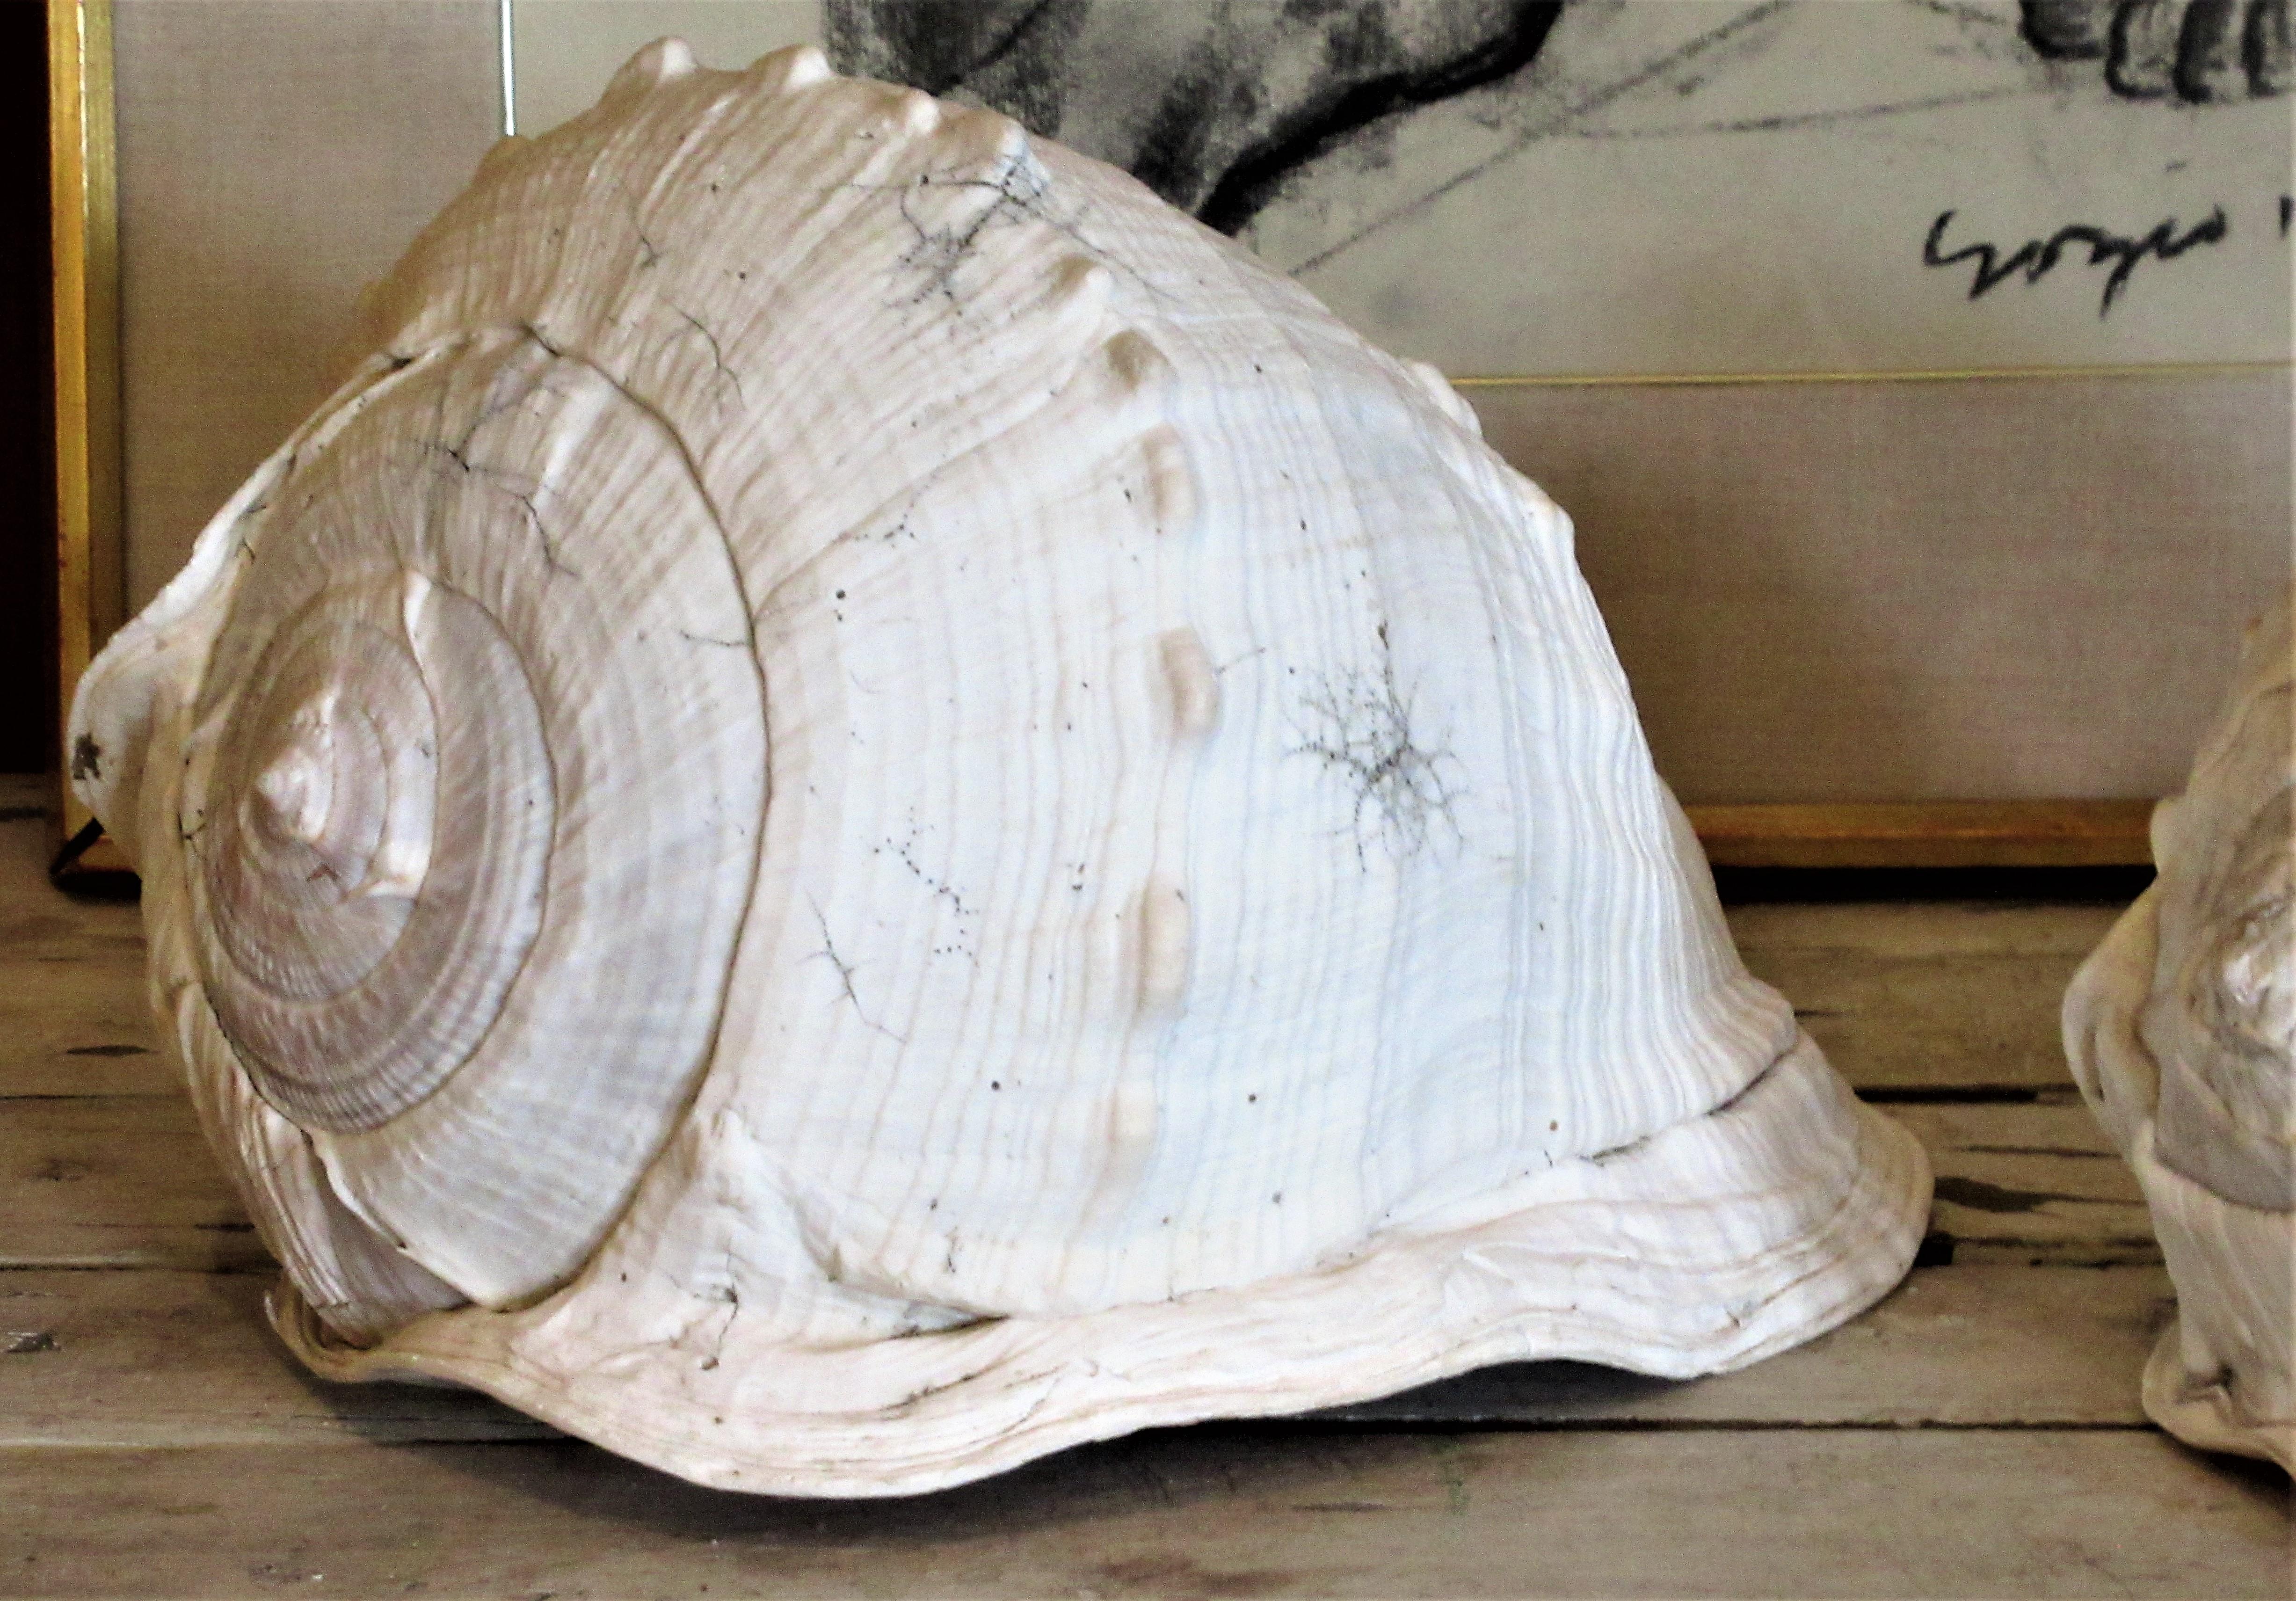  Old Queen Helmet Conch Shell Specimens 9